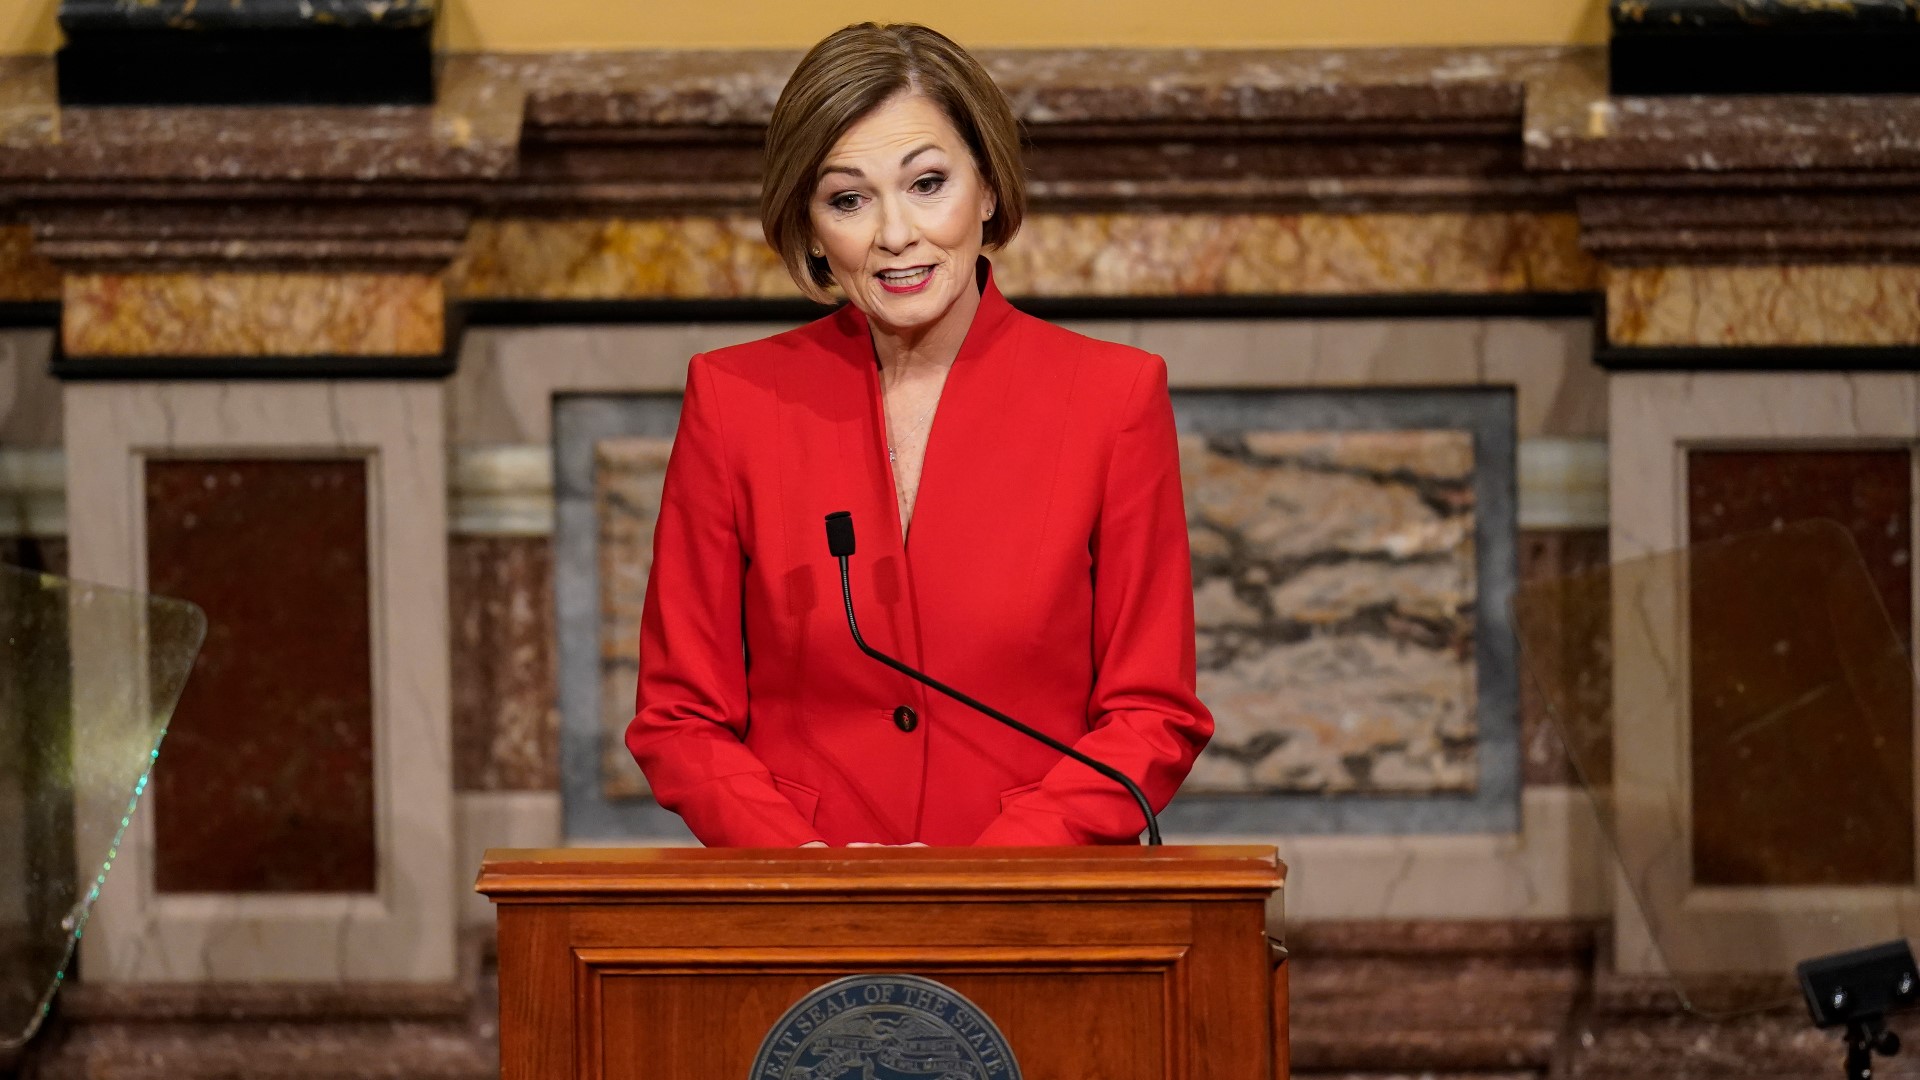 Tuesday night's speech was Reynolds' third Condition of the State as Governor of Iowa.